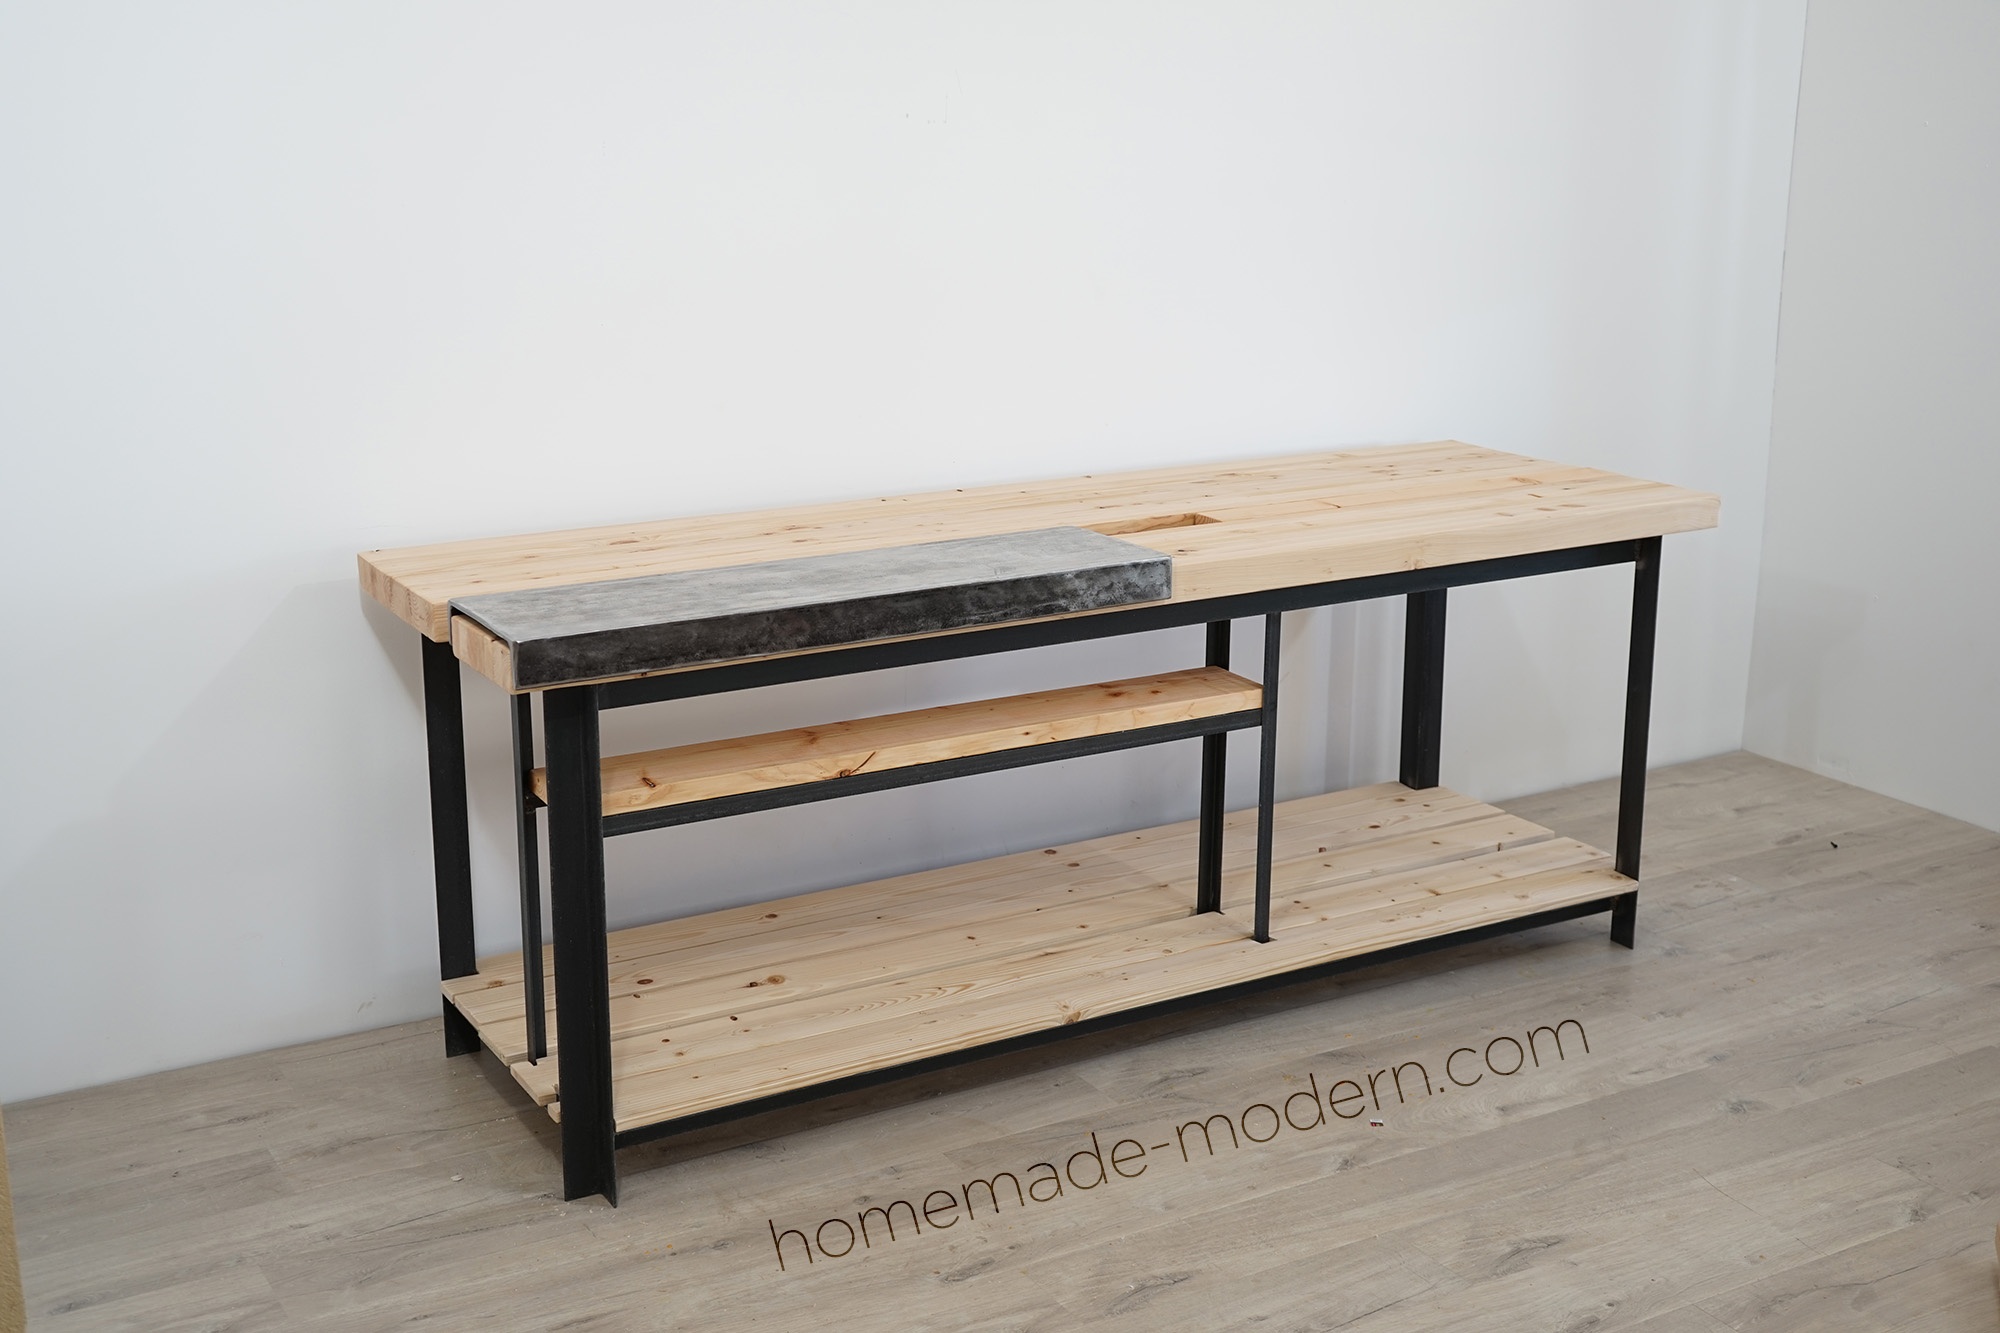 Ben Uyeda of HomeMade Modern designed and built this split top workbench with a removable steel top. For more information go to HomeMade-Modern.com